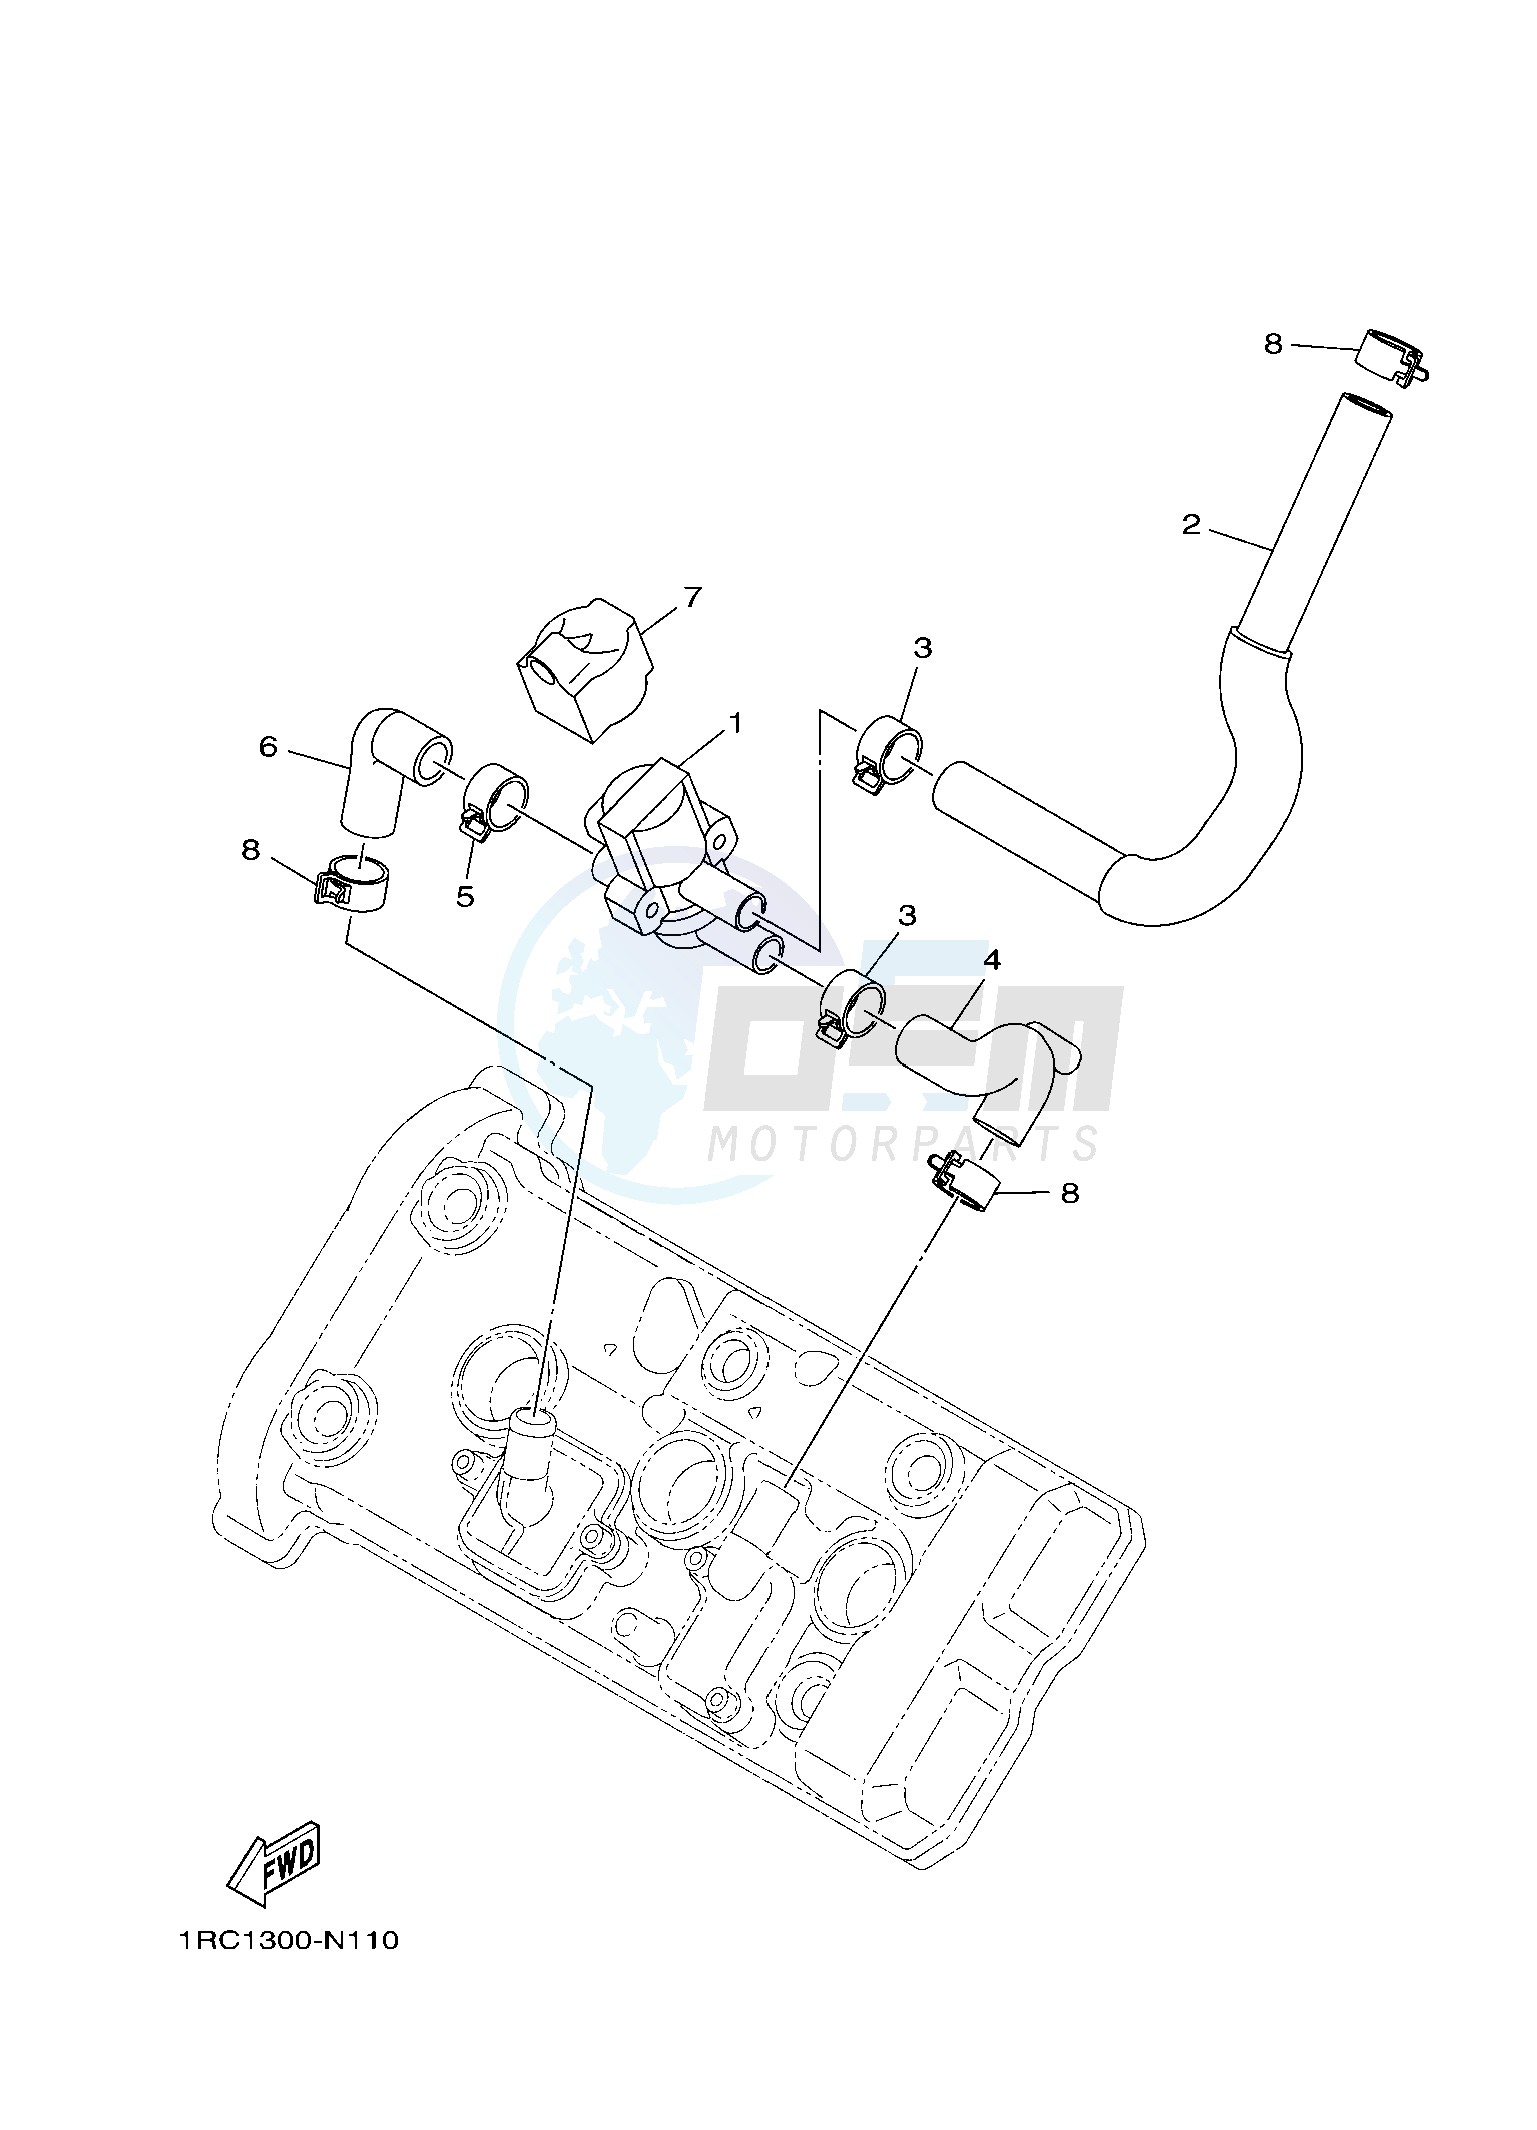 AIR INDUCTION SYSTEM blueprint